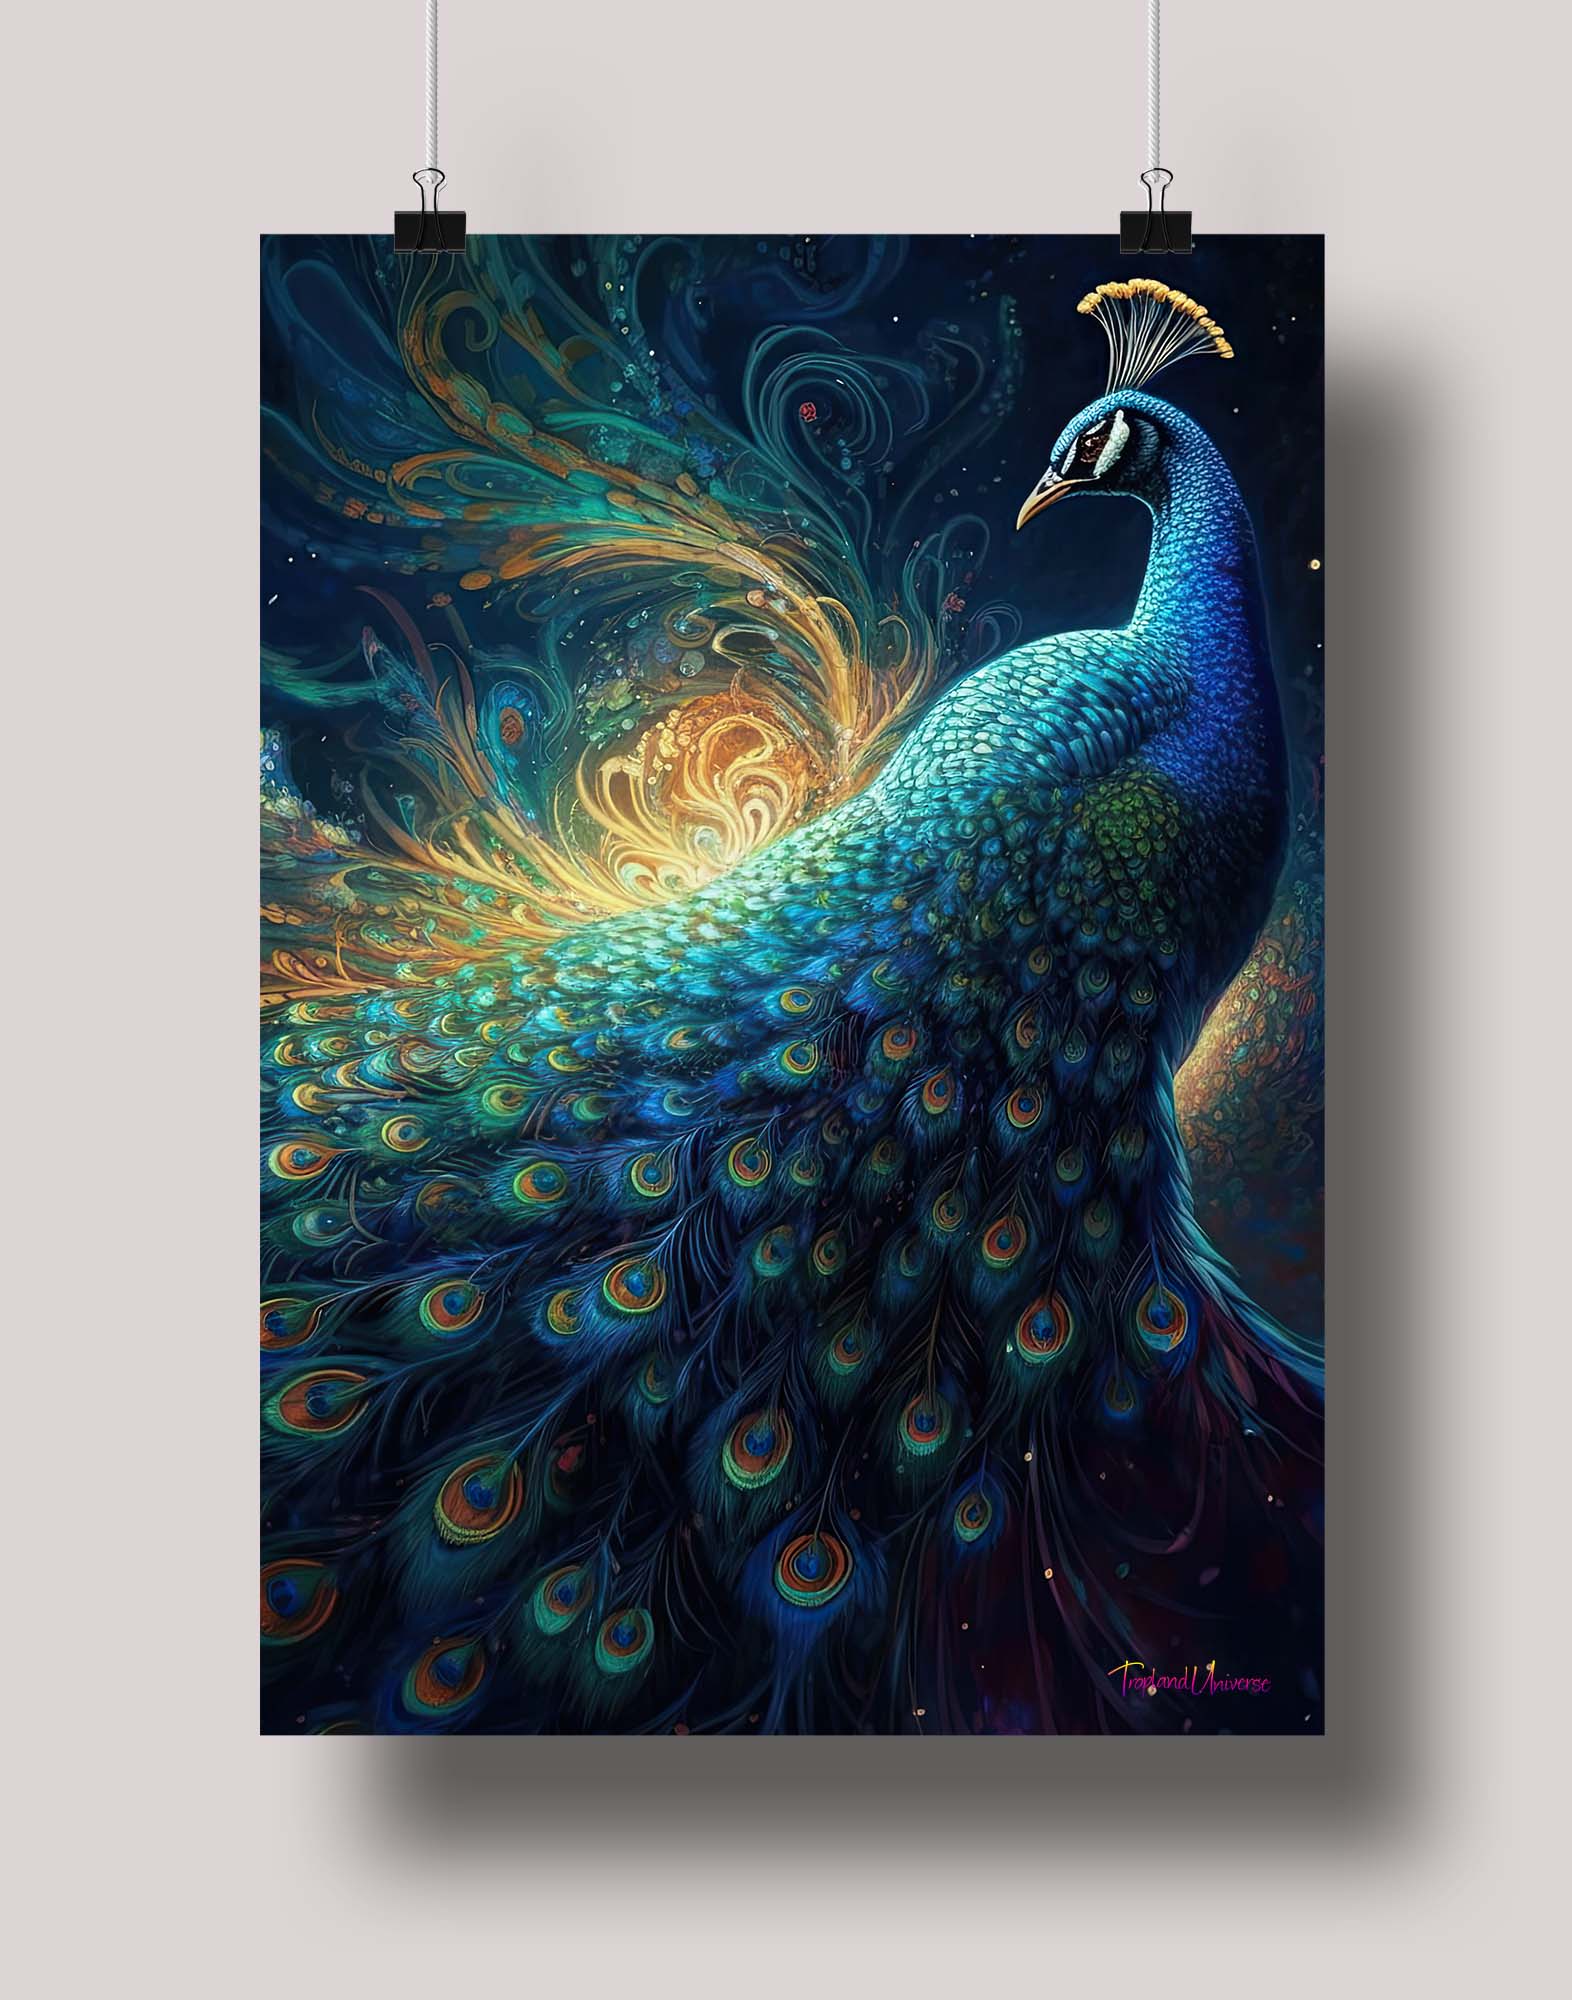 Dazzling Peacock: Museum-Grade Poster - Tropland Universe